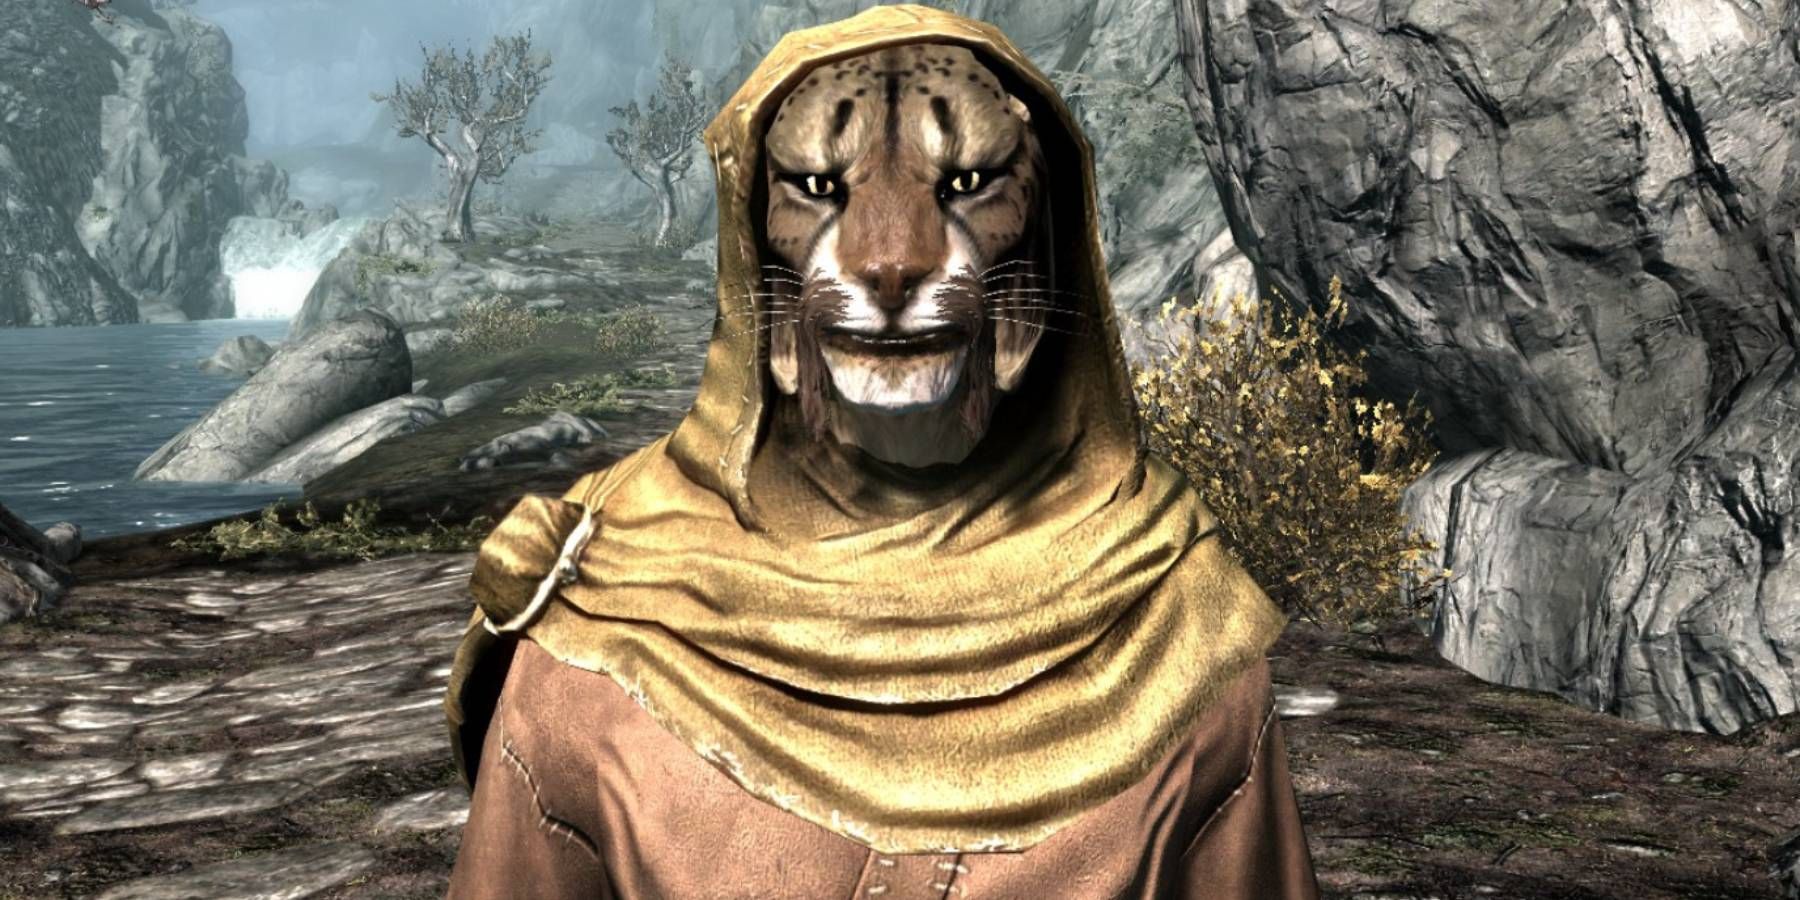 M'aiq The Liar watches the player in Skyrim